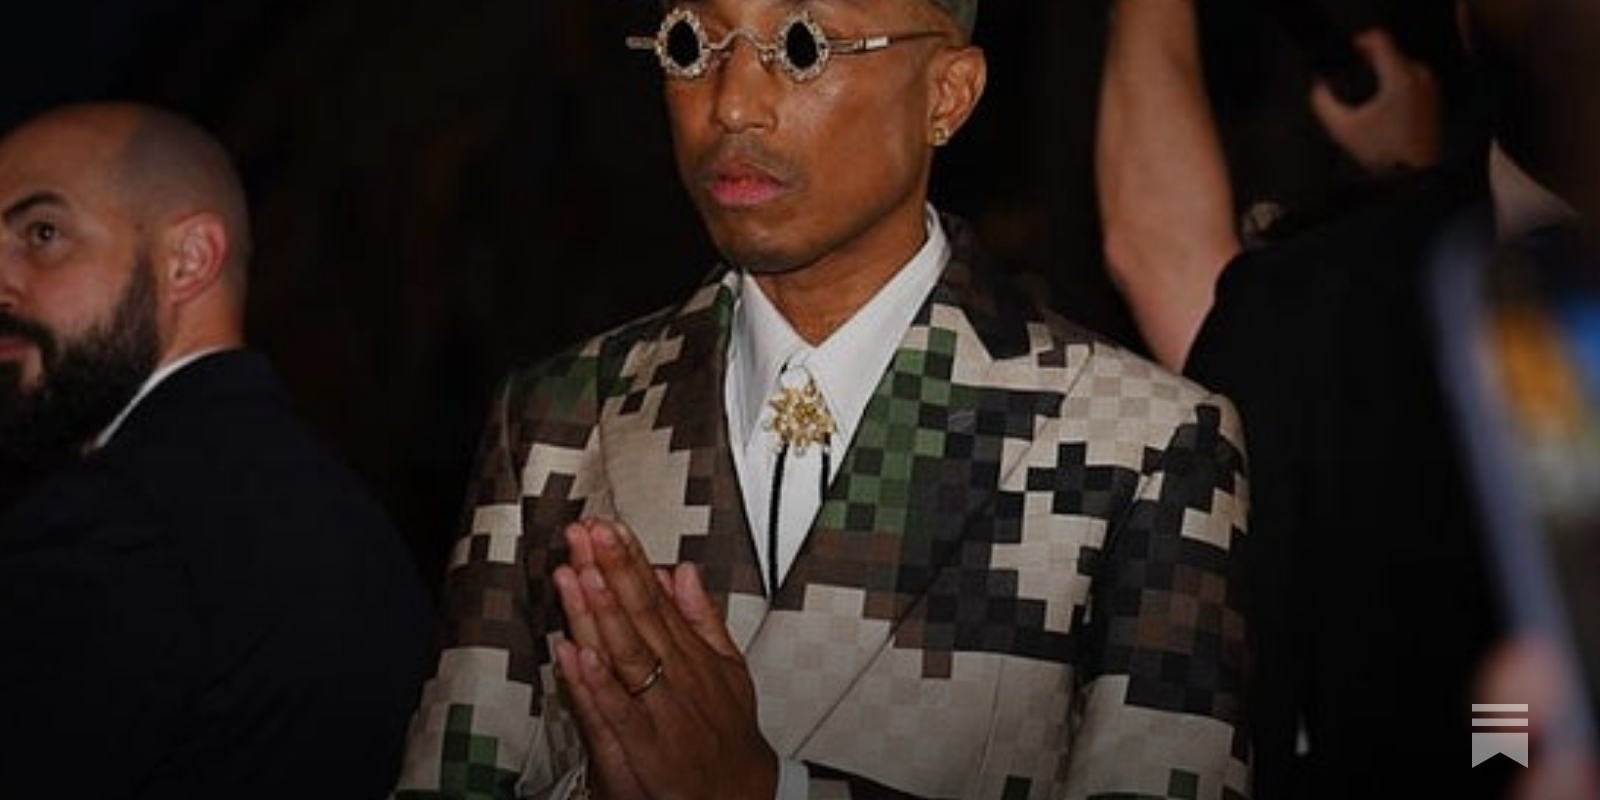 Not happy – why Pharrell Williams needs to update his views on childcare, Fashion